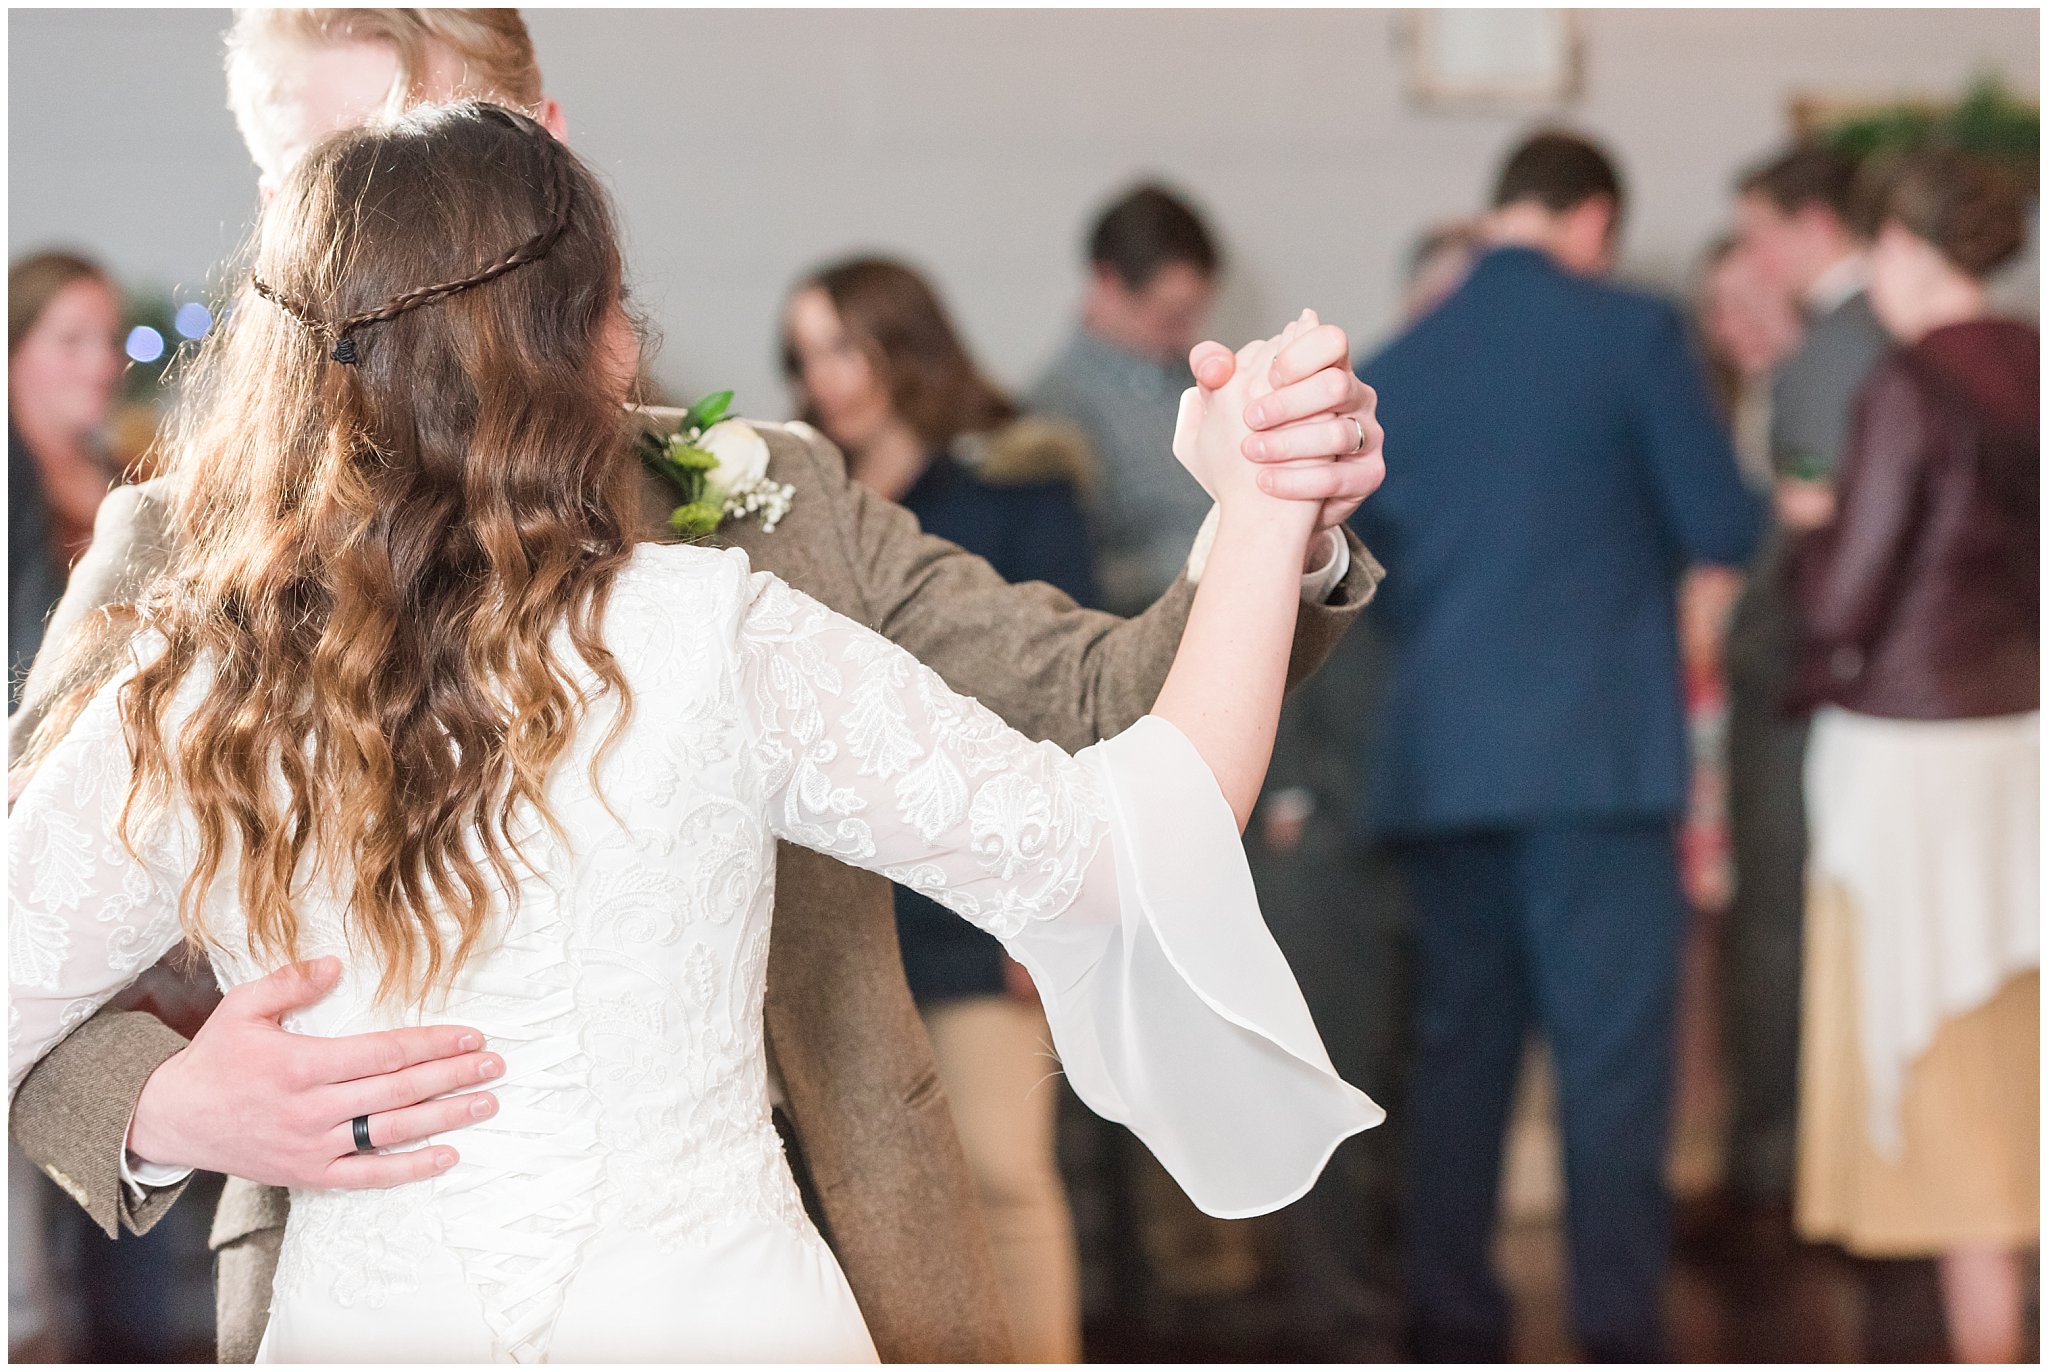 Bride and groom first dance during reception at Sweet Magnolia Venues | Brown, Emerald Green, and white wedding | Ogden Temple and Sweet Magnolia Wedding | Jessie and Dallin Photography